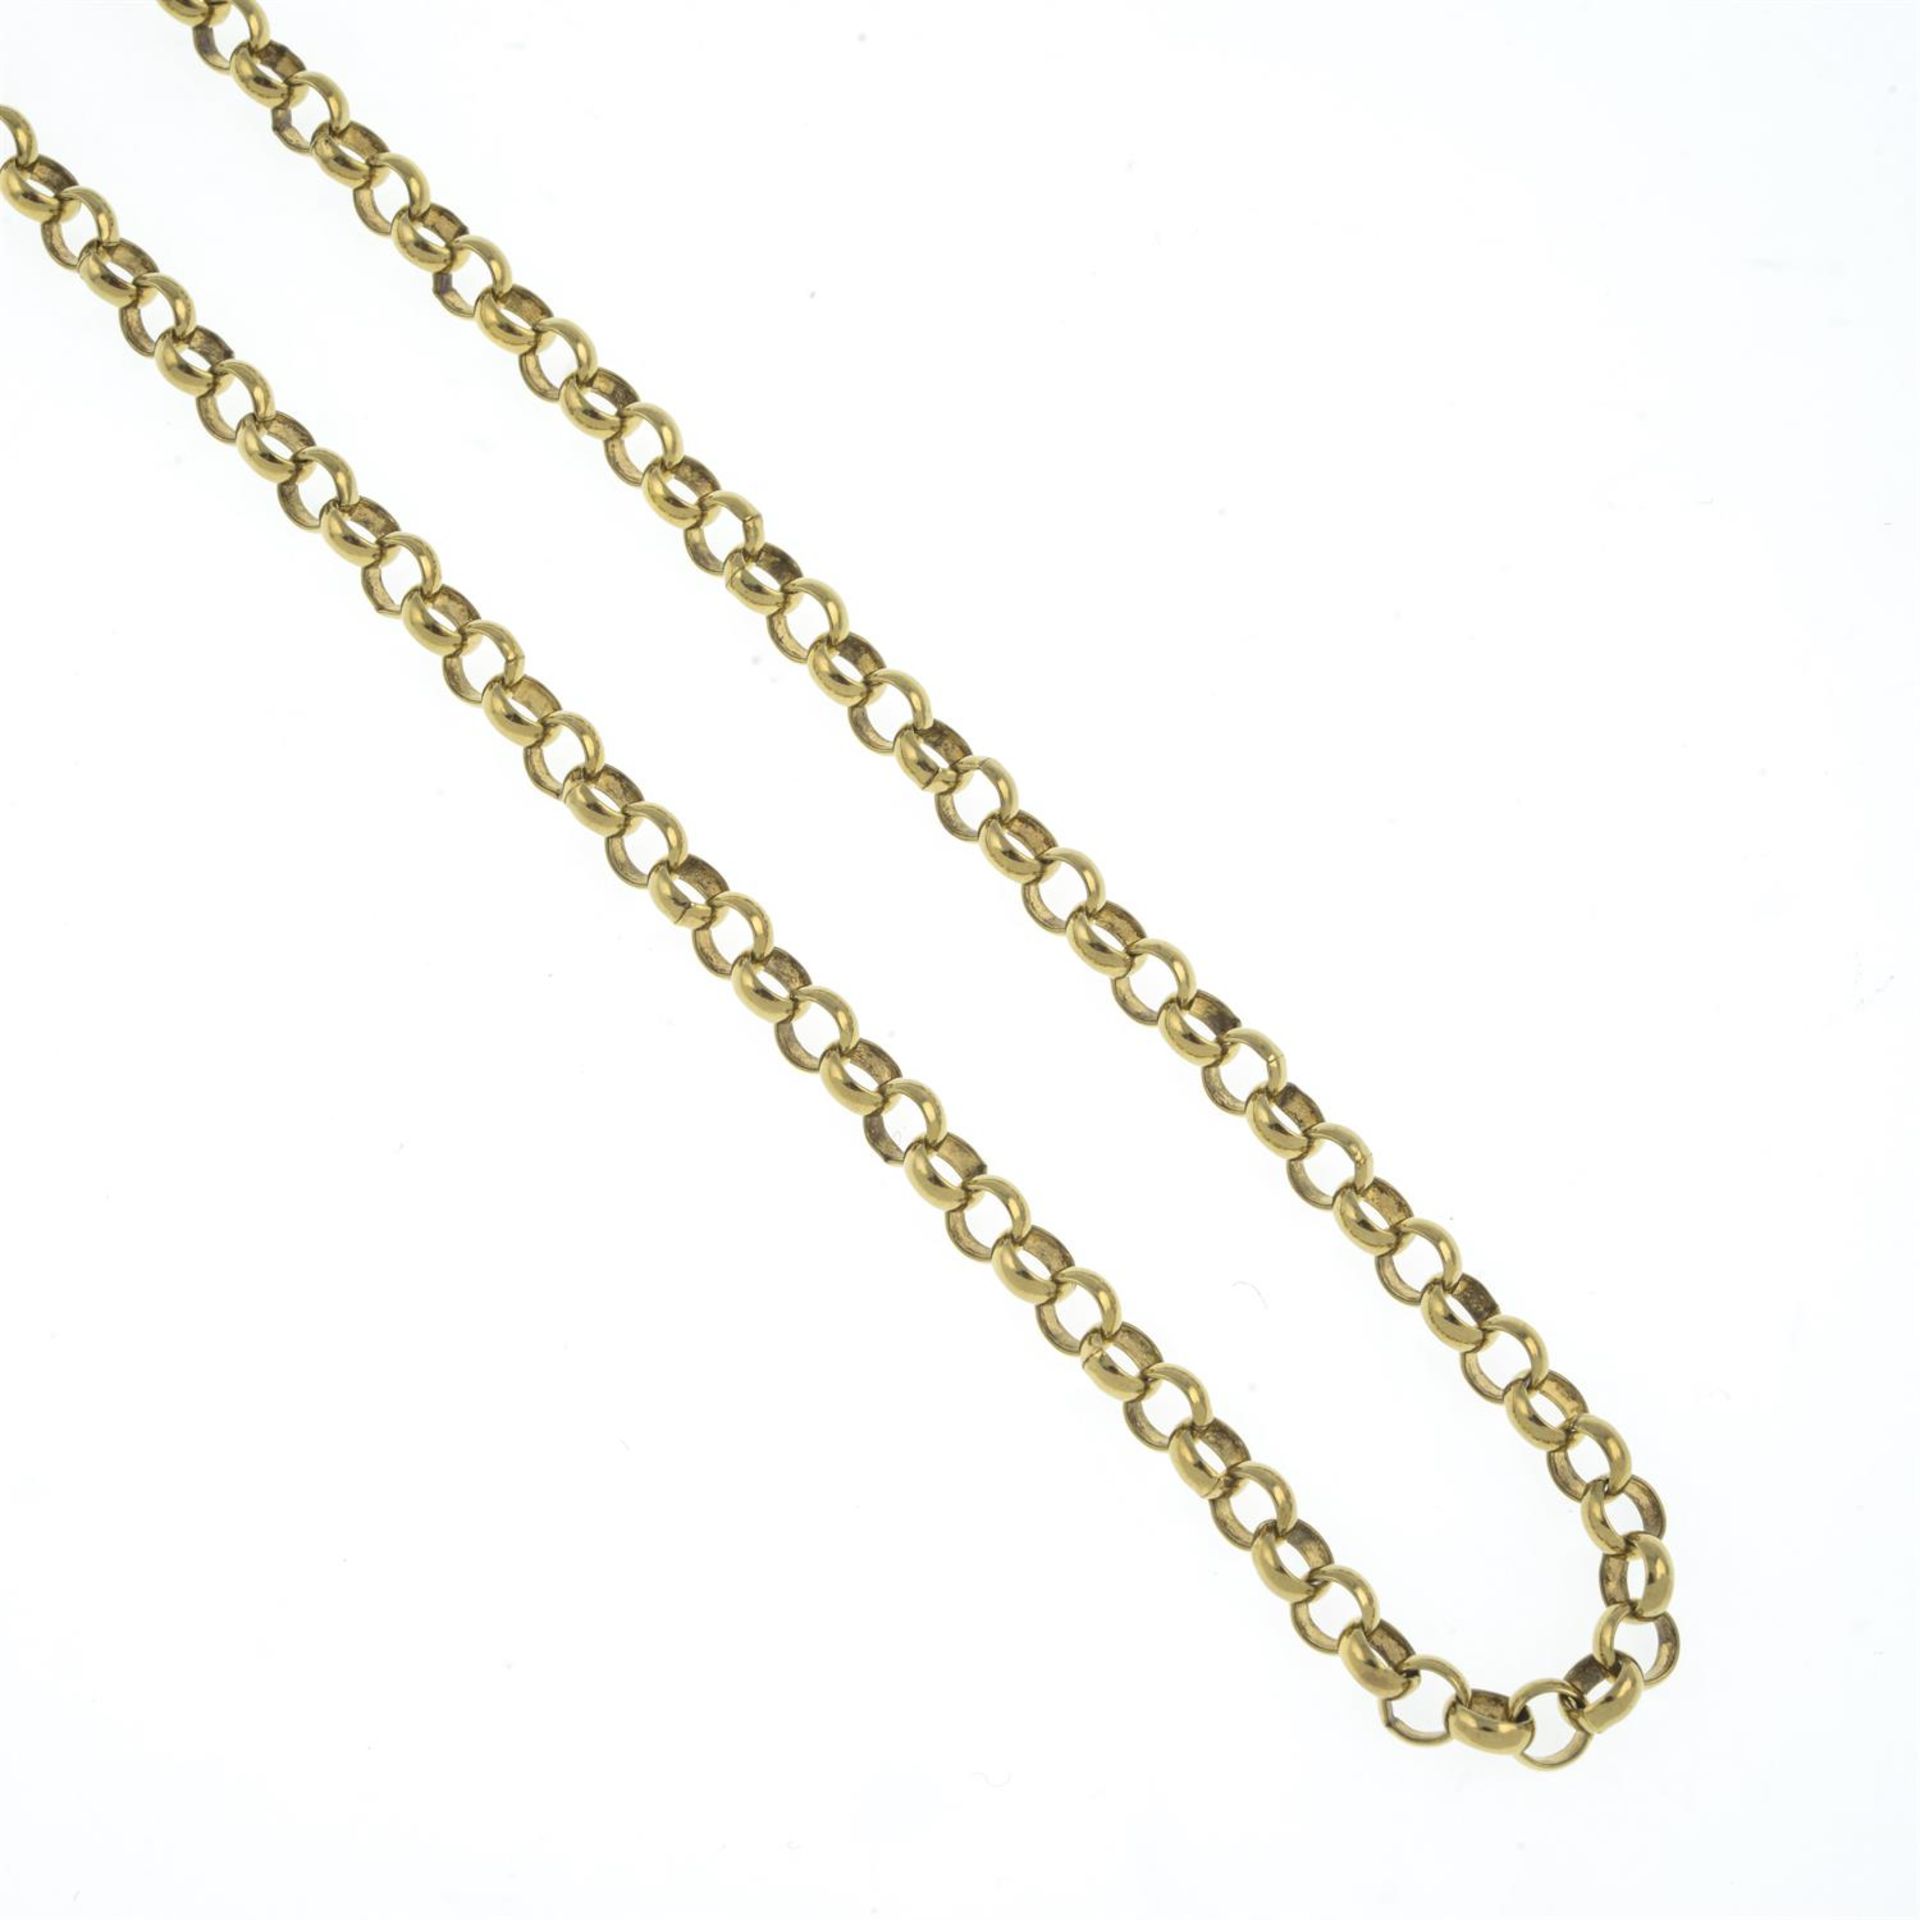 Chain necklace - Image 2 of 2